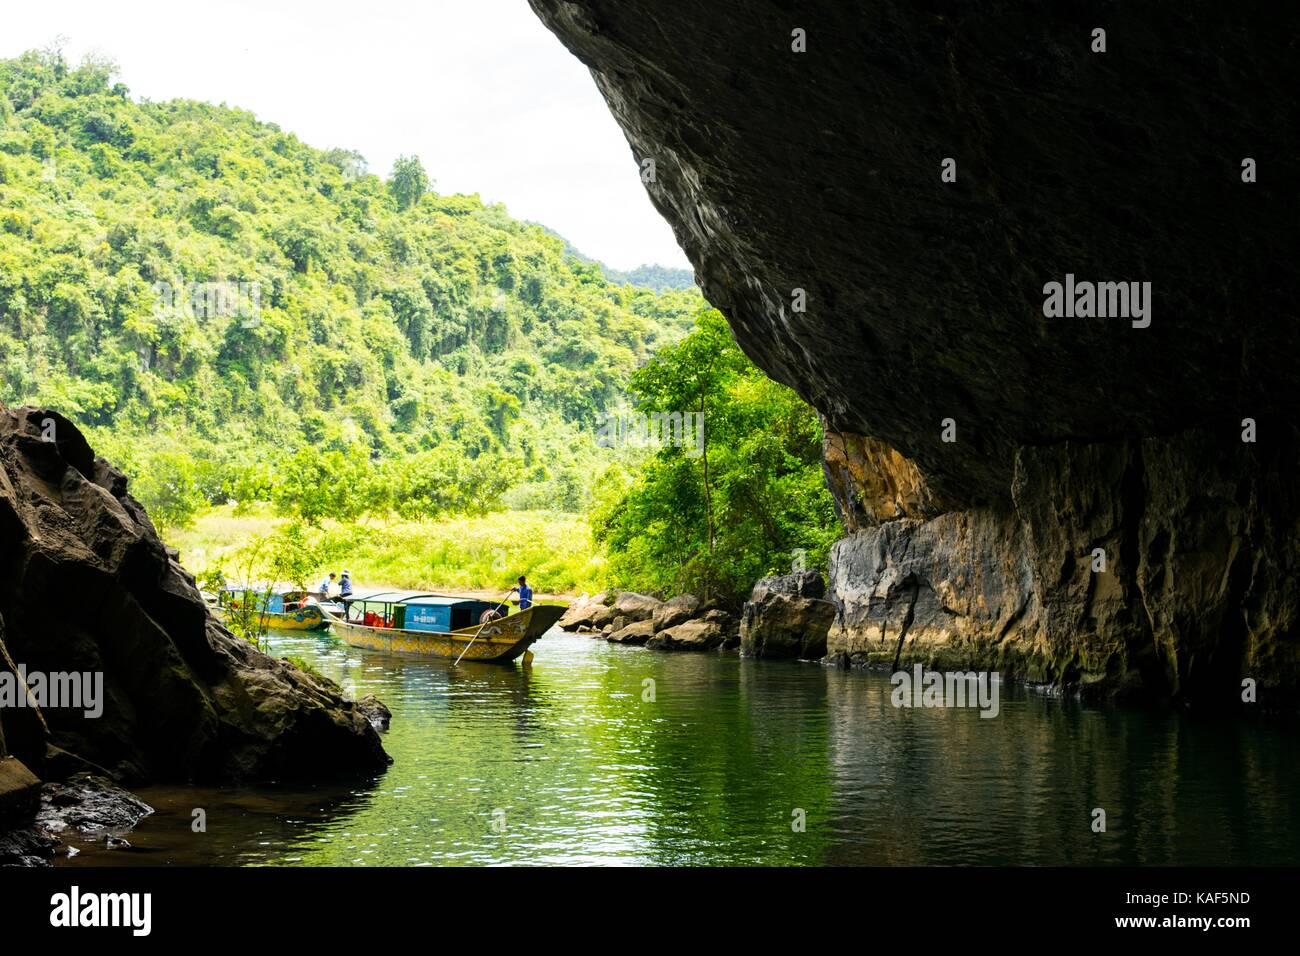 Entrance to Phong Nha Ke Bang Underground River, Caves, Limestone and Karsts Formations (UNESCO World Heritage Site) - Quang Binh, Vietnam Stock Photo